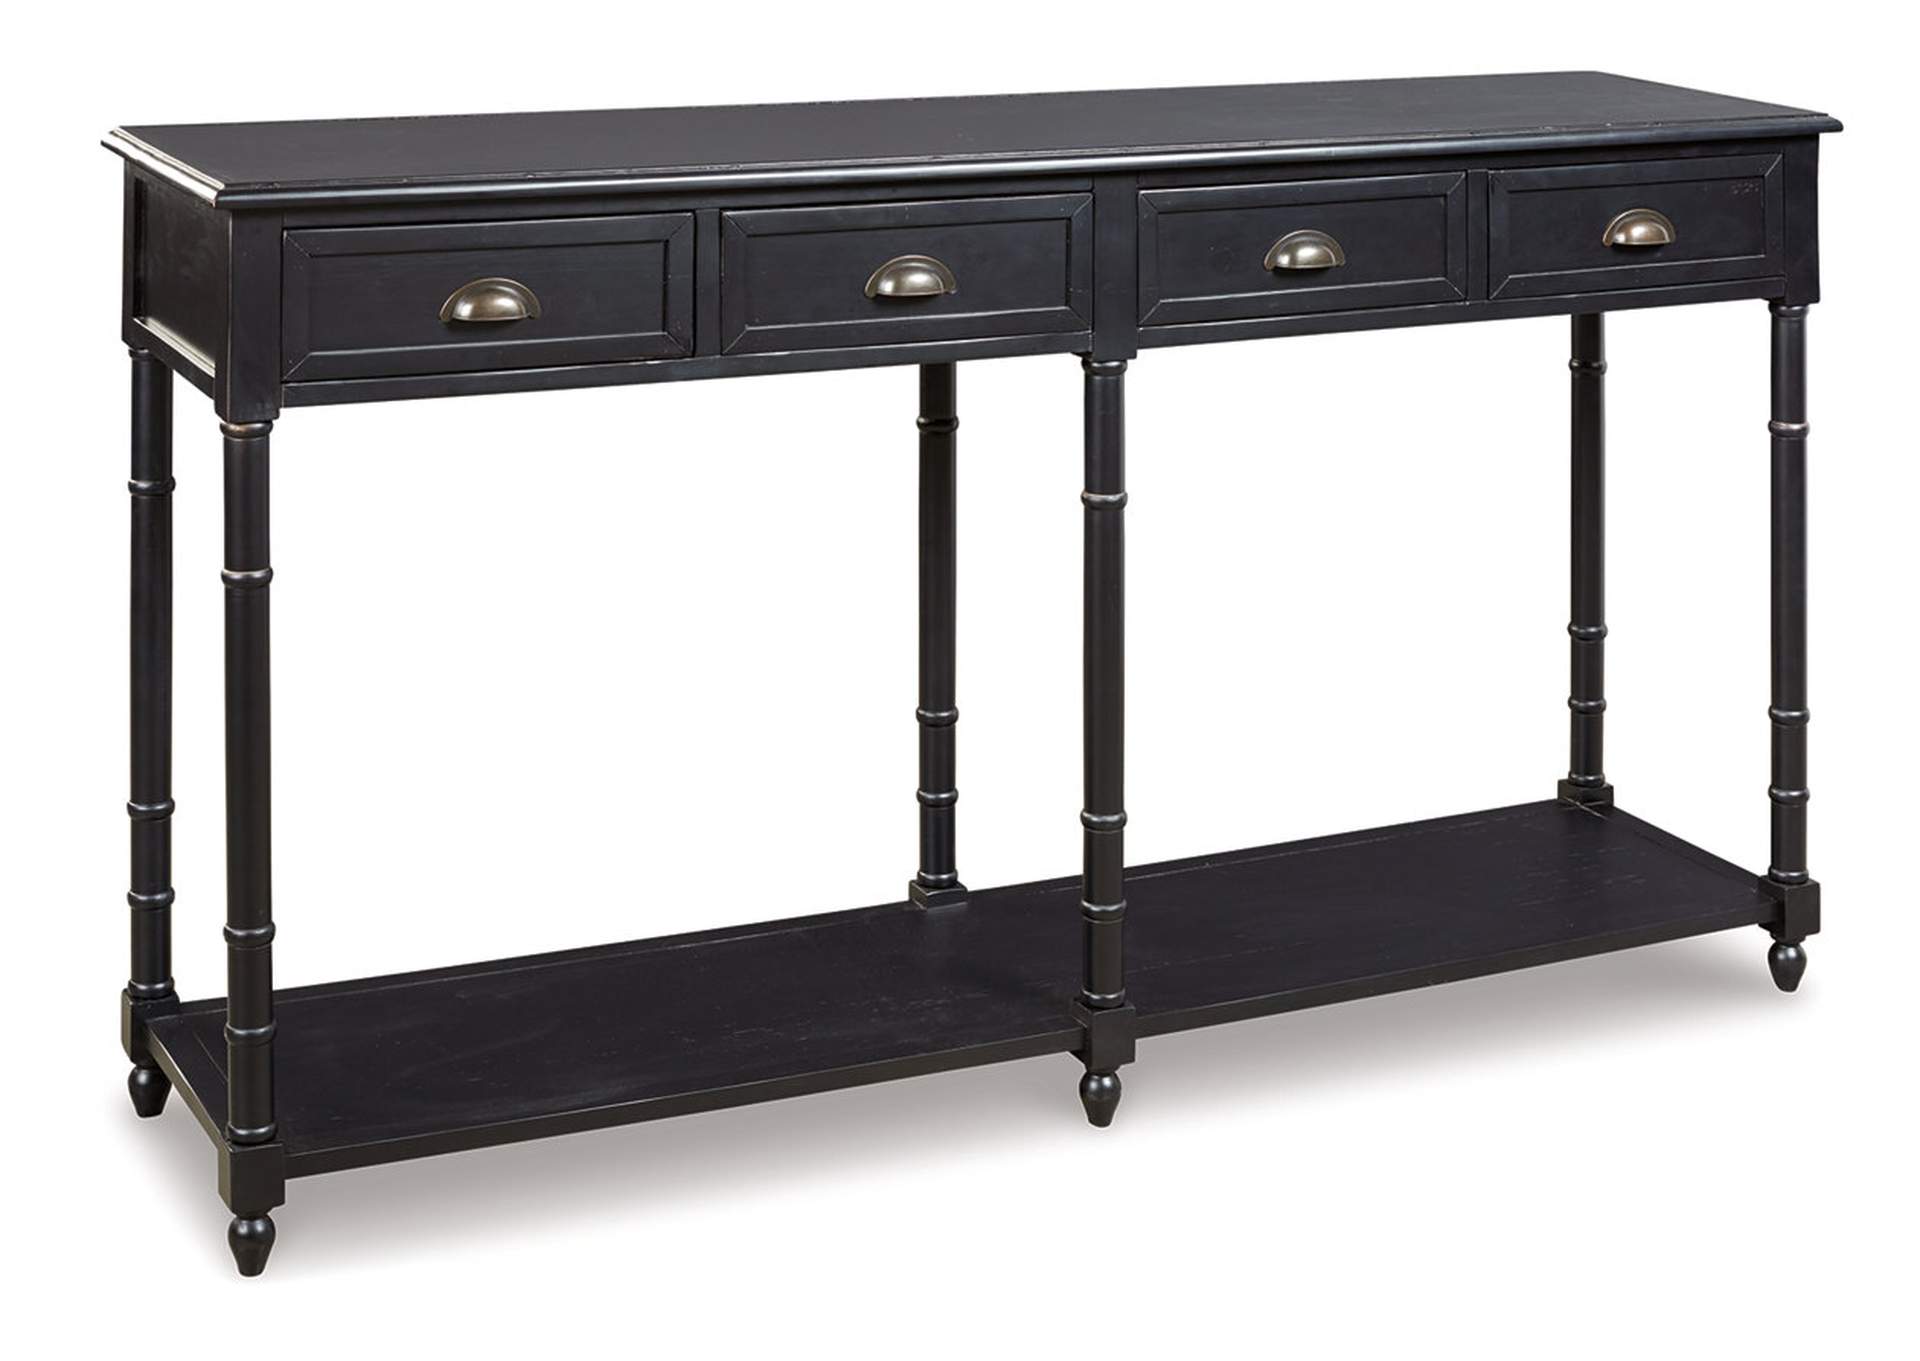 Eirdale Black Sofa Table,Direct To Consumer Express